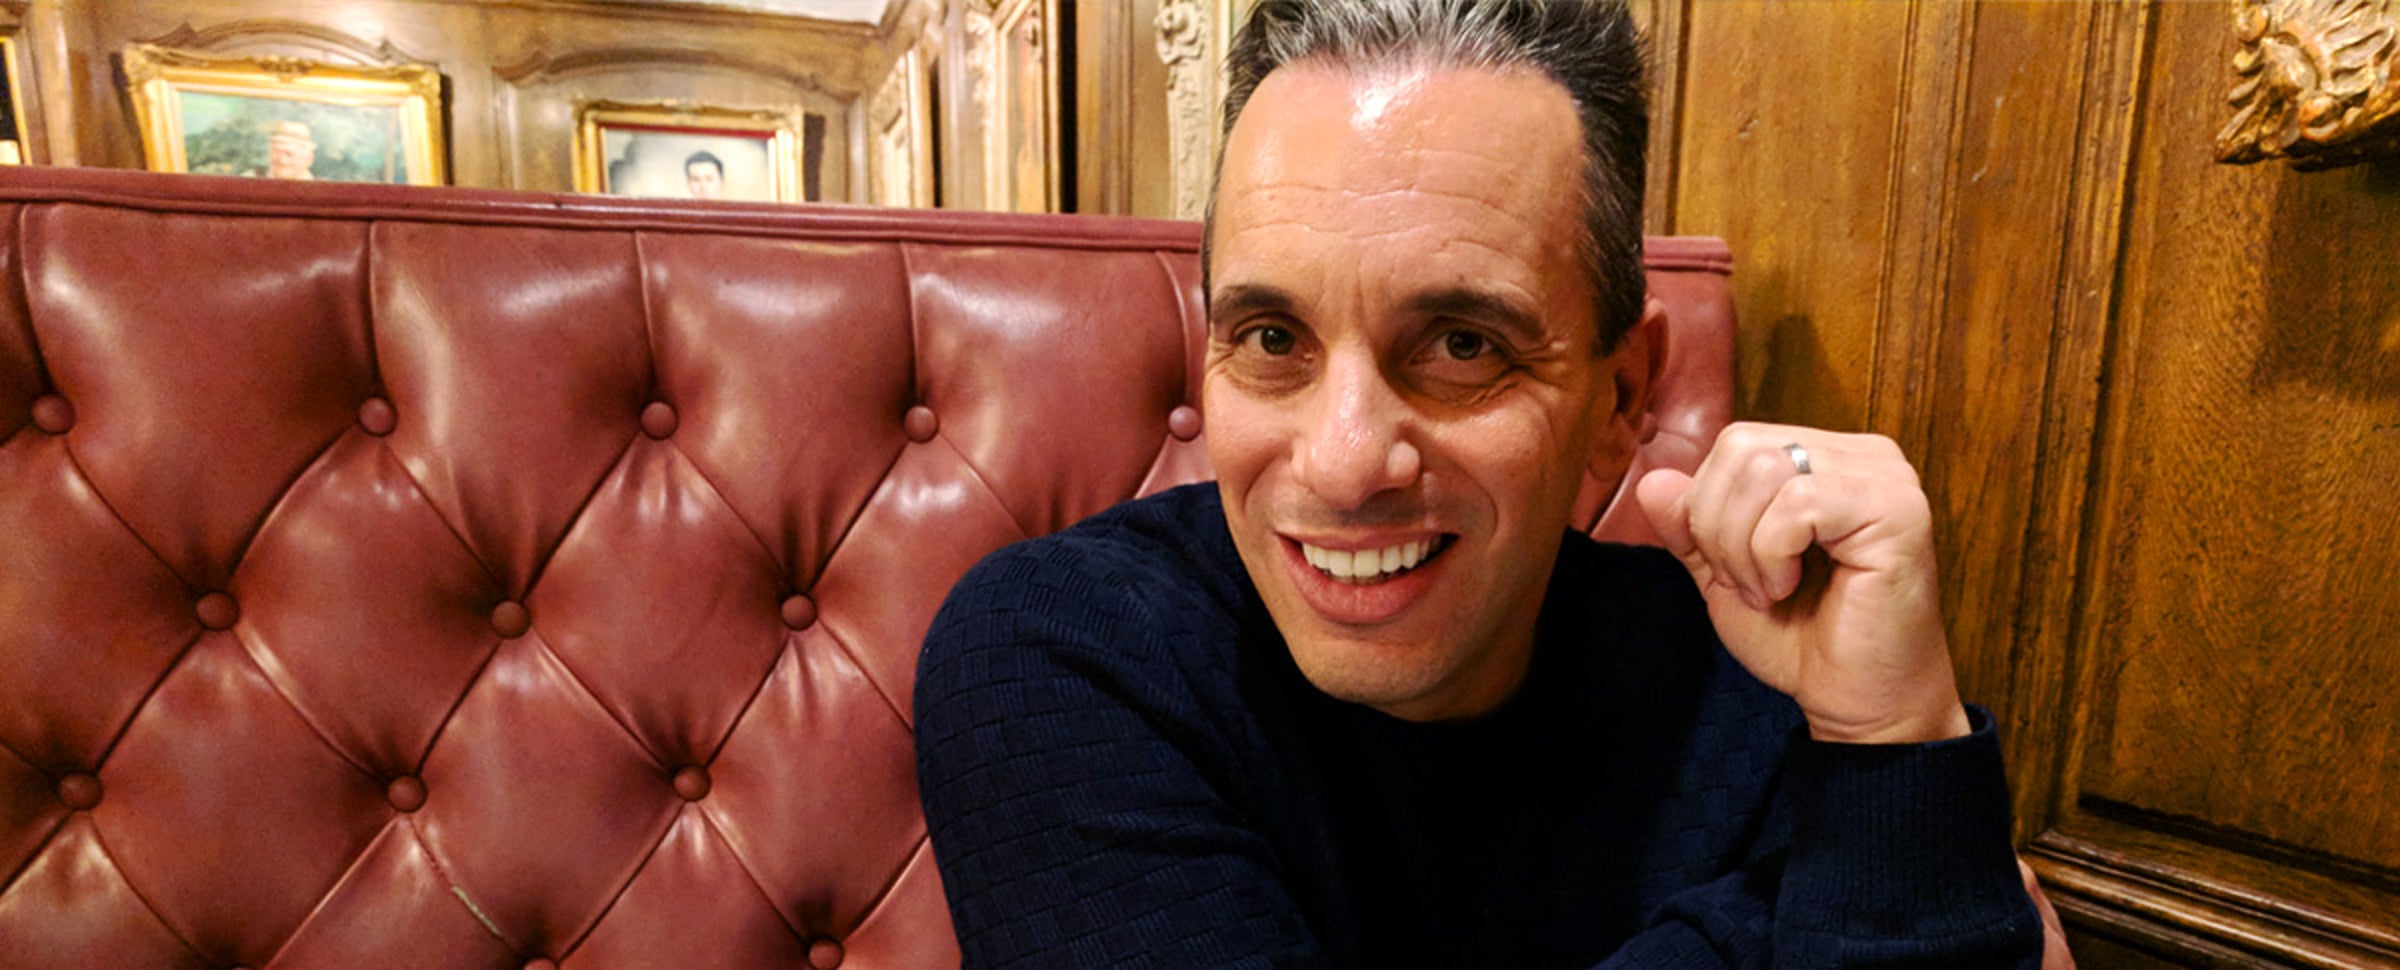 Comedian Sebastian Maniscalco is an Old-School Comic and Family Man (in a Good Way)